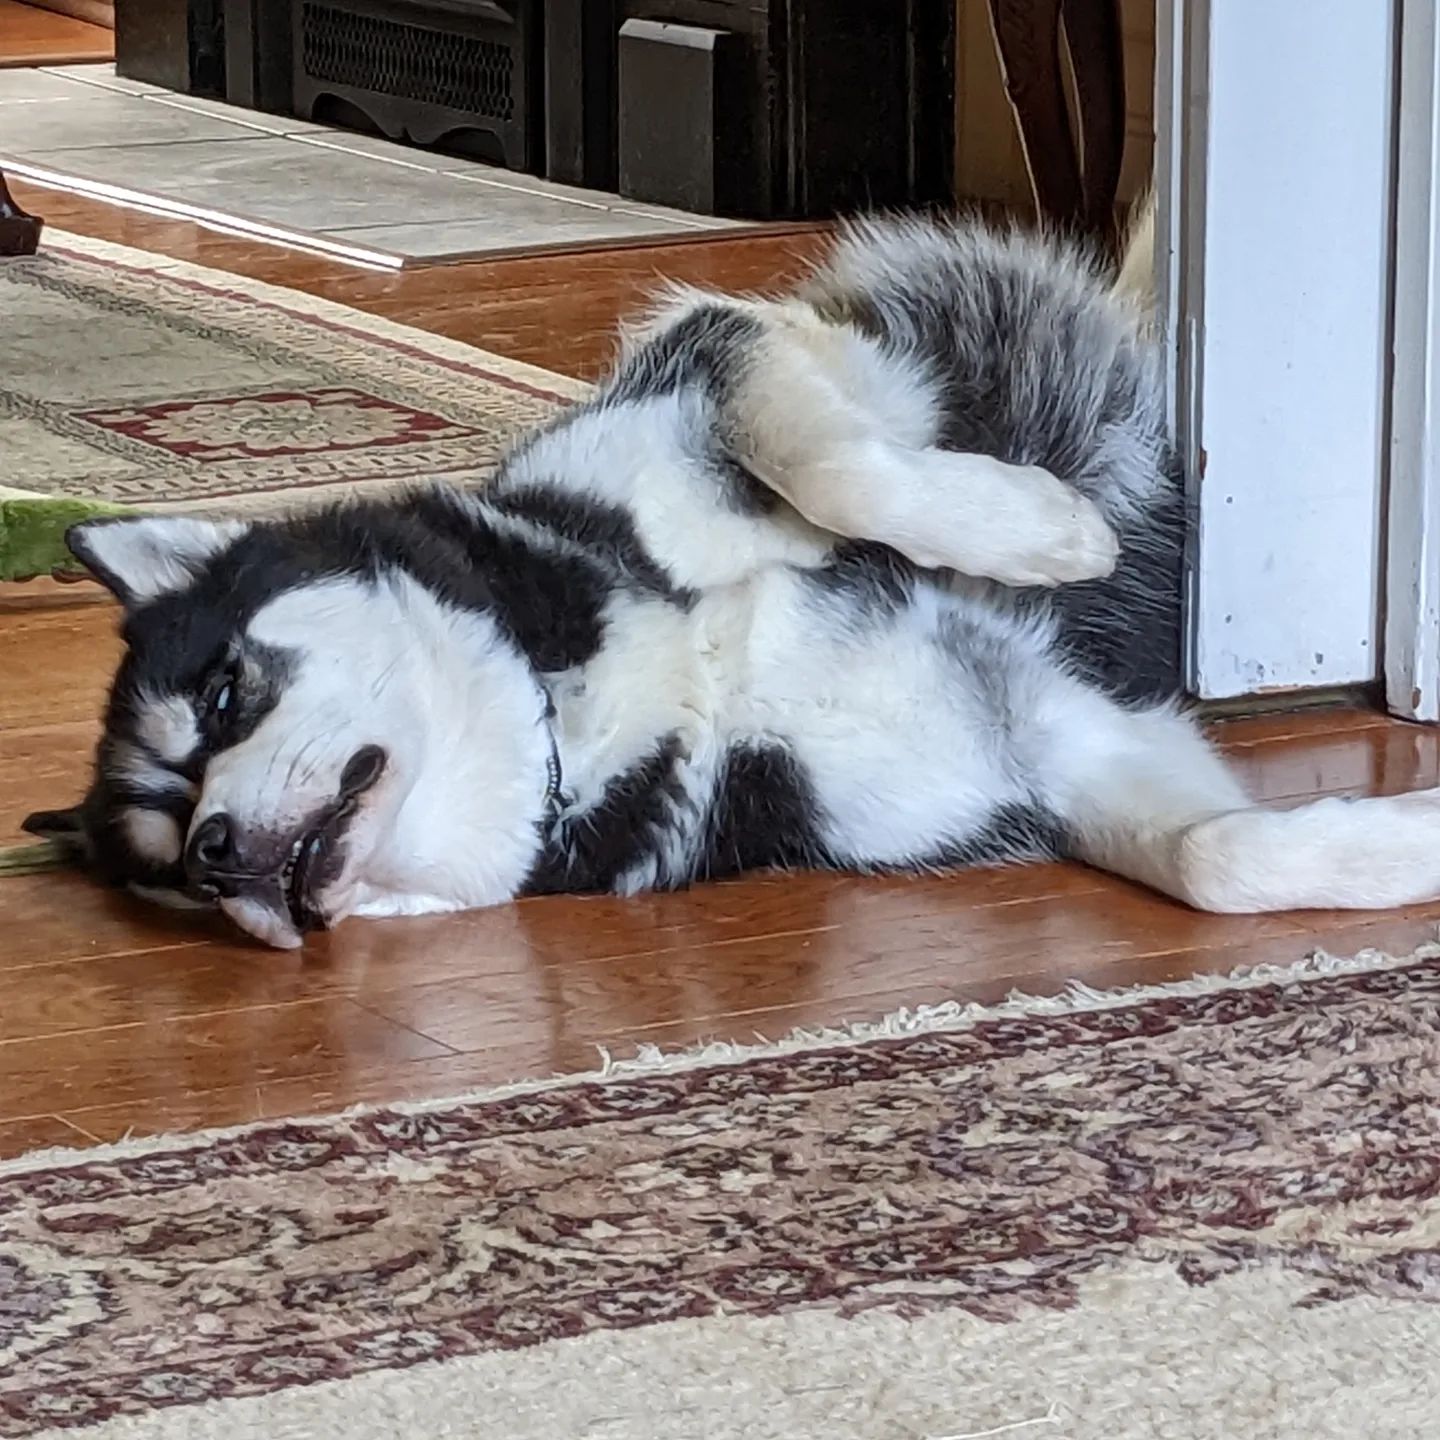 Must be such a rough life being a dog... #siberianhusky #huskiesofinstagram #stlnanuq